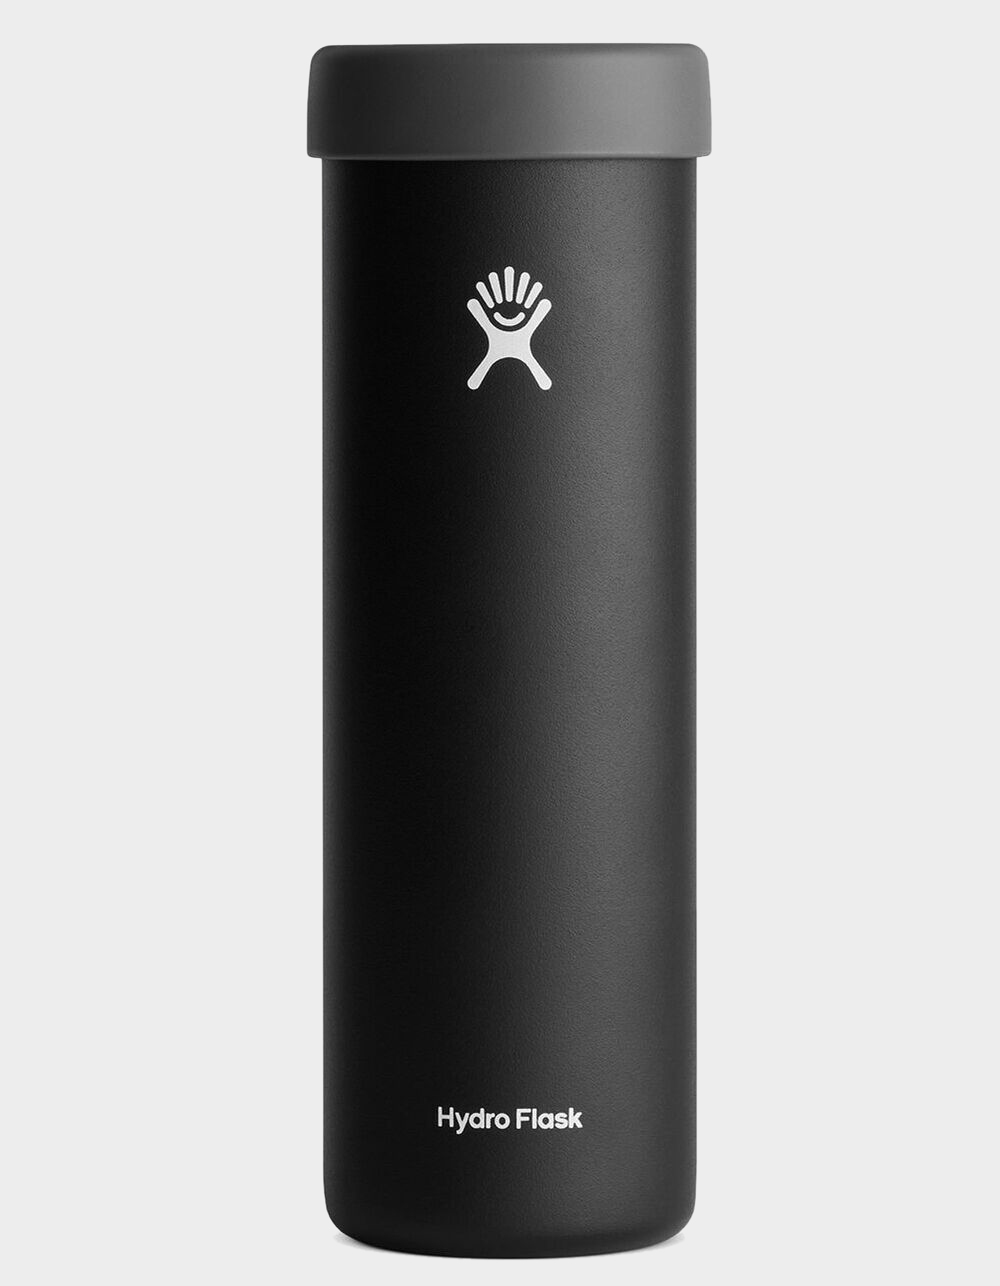 Hydro Flask Tandem Cooler Cup - 26 oz.